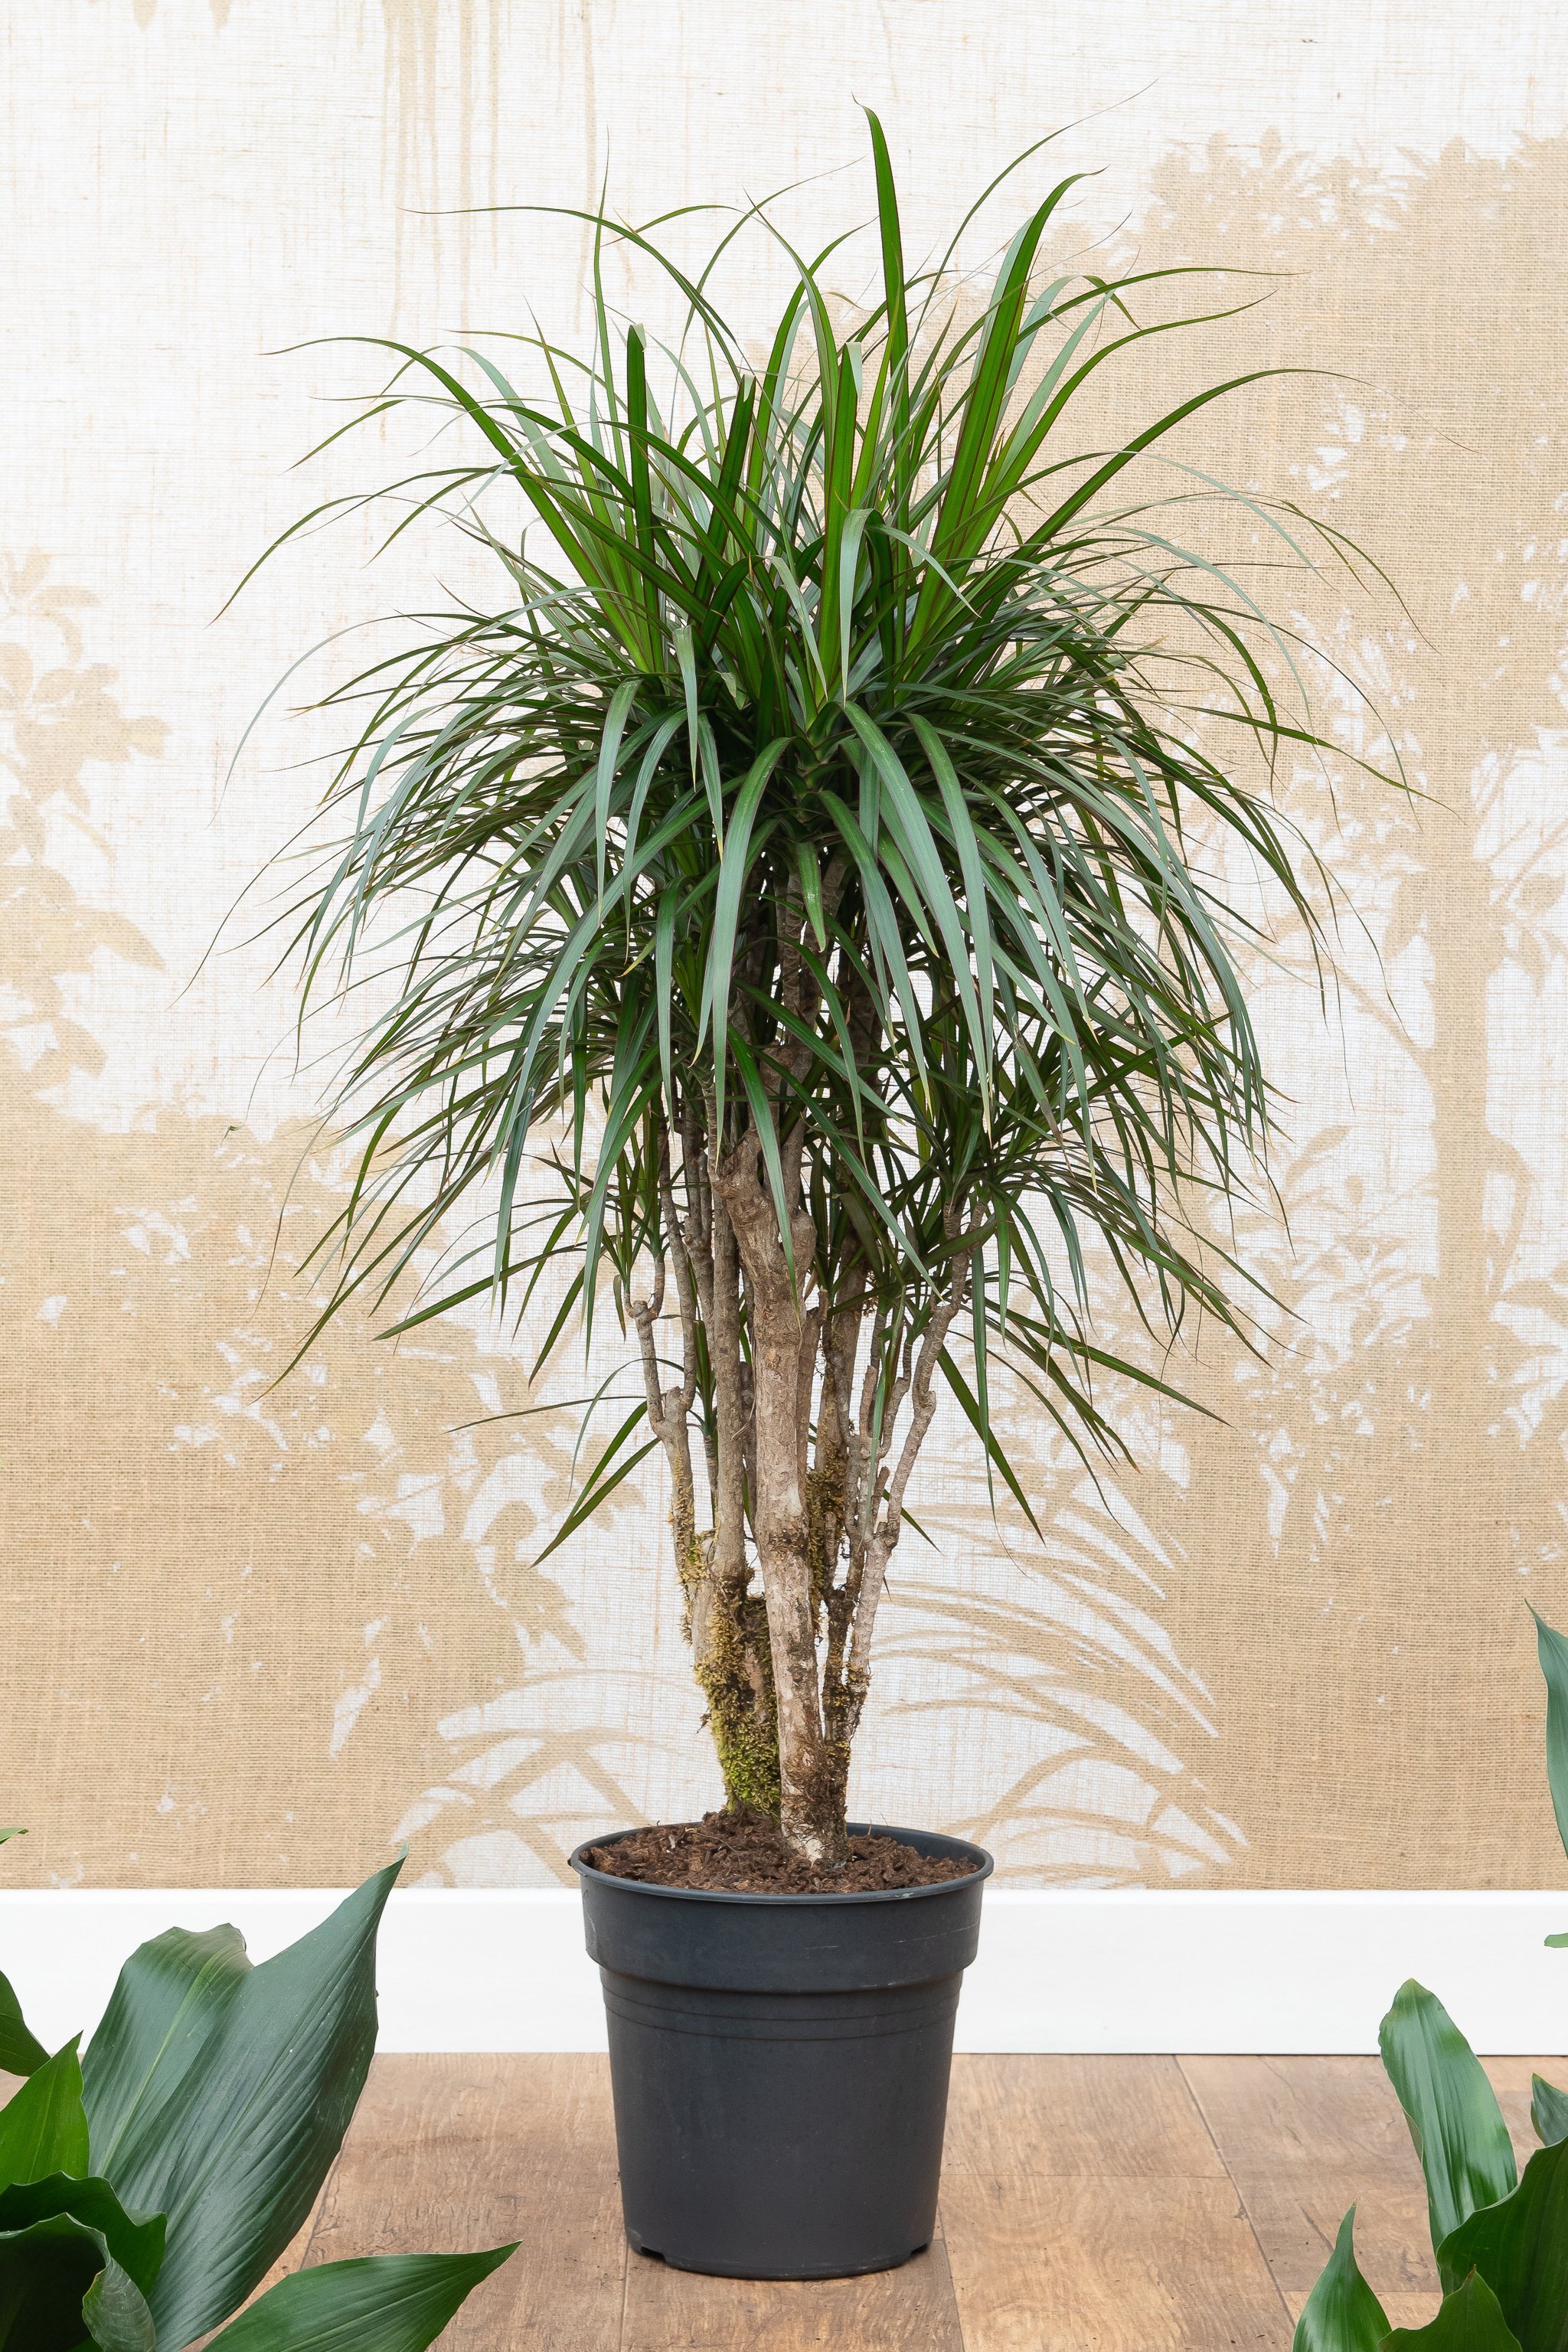 The 26 most beautiful trees to grow as houseplants in your living space - 183